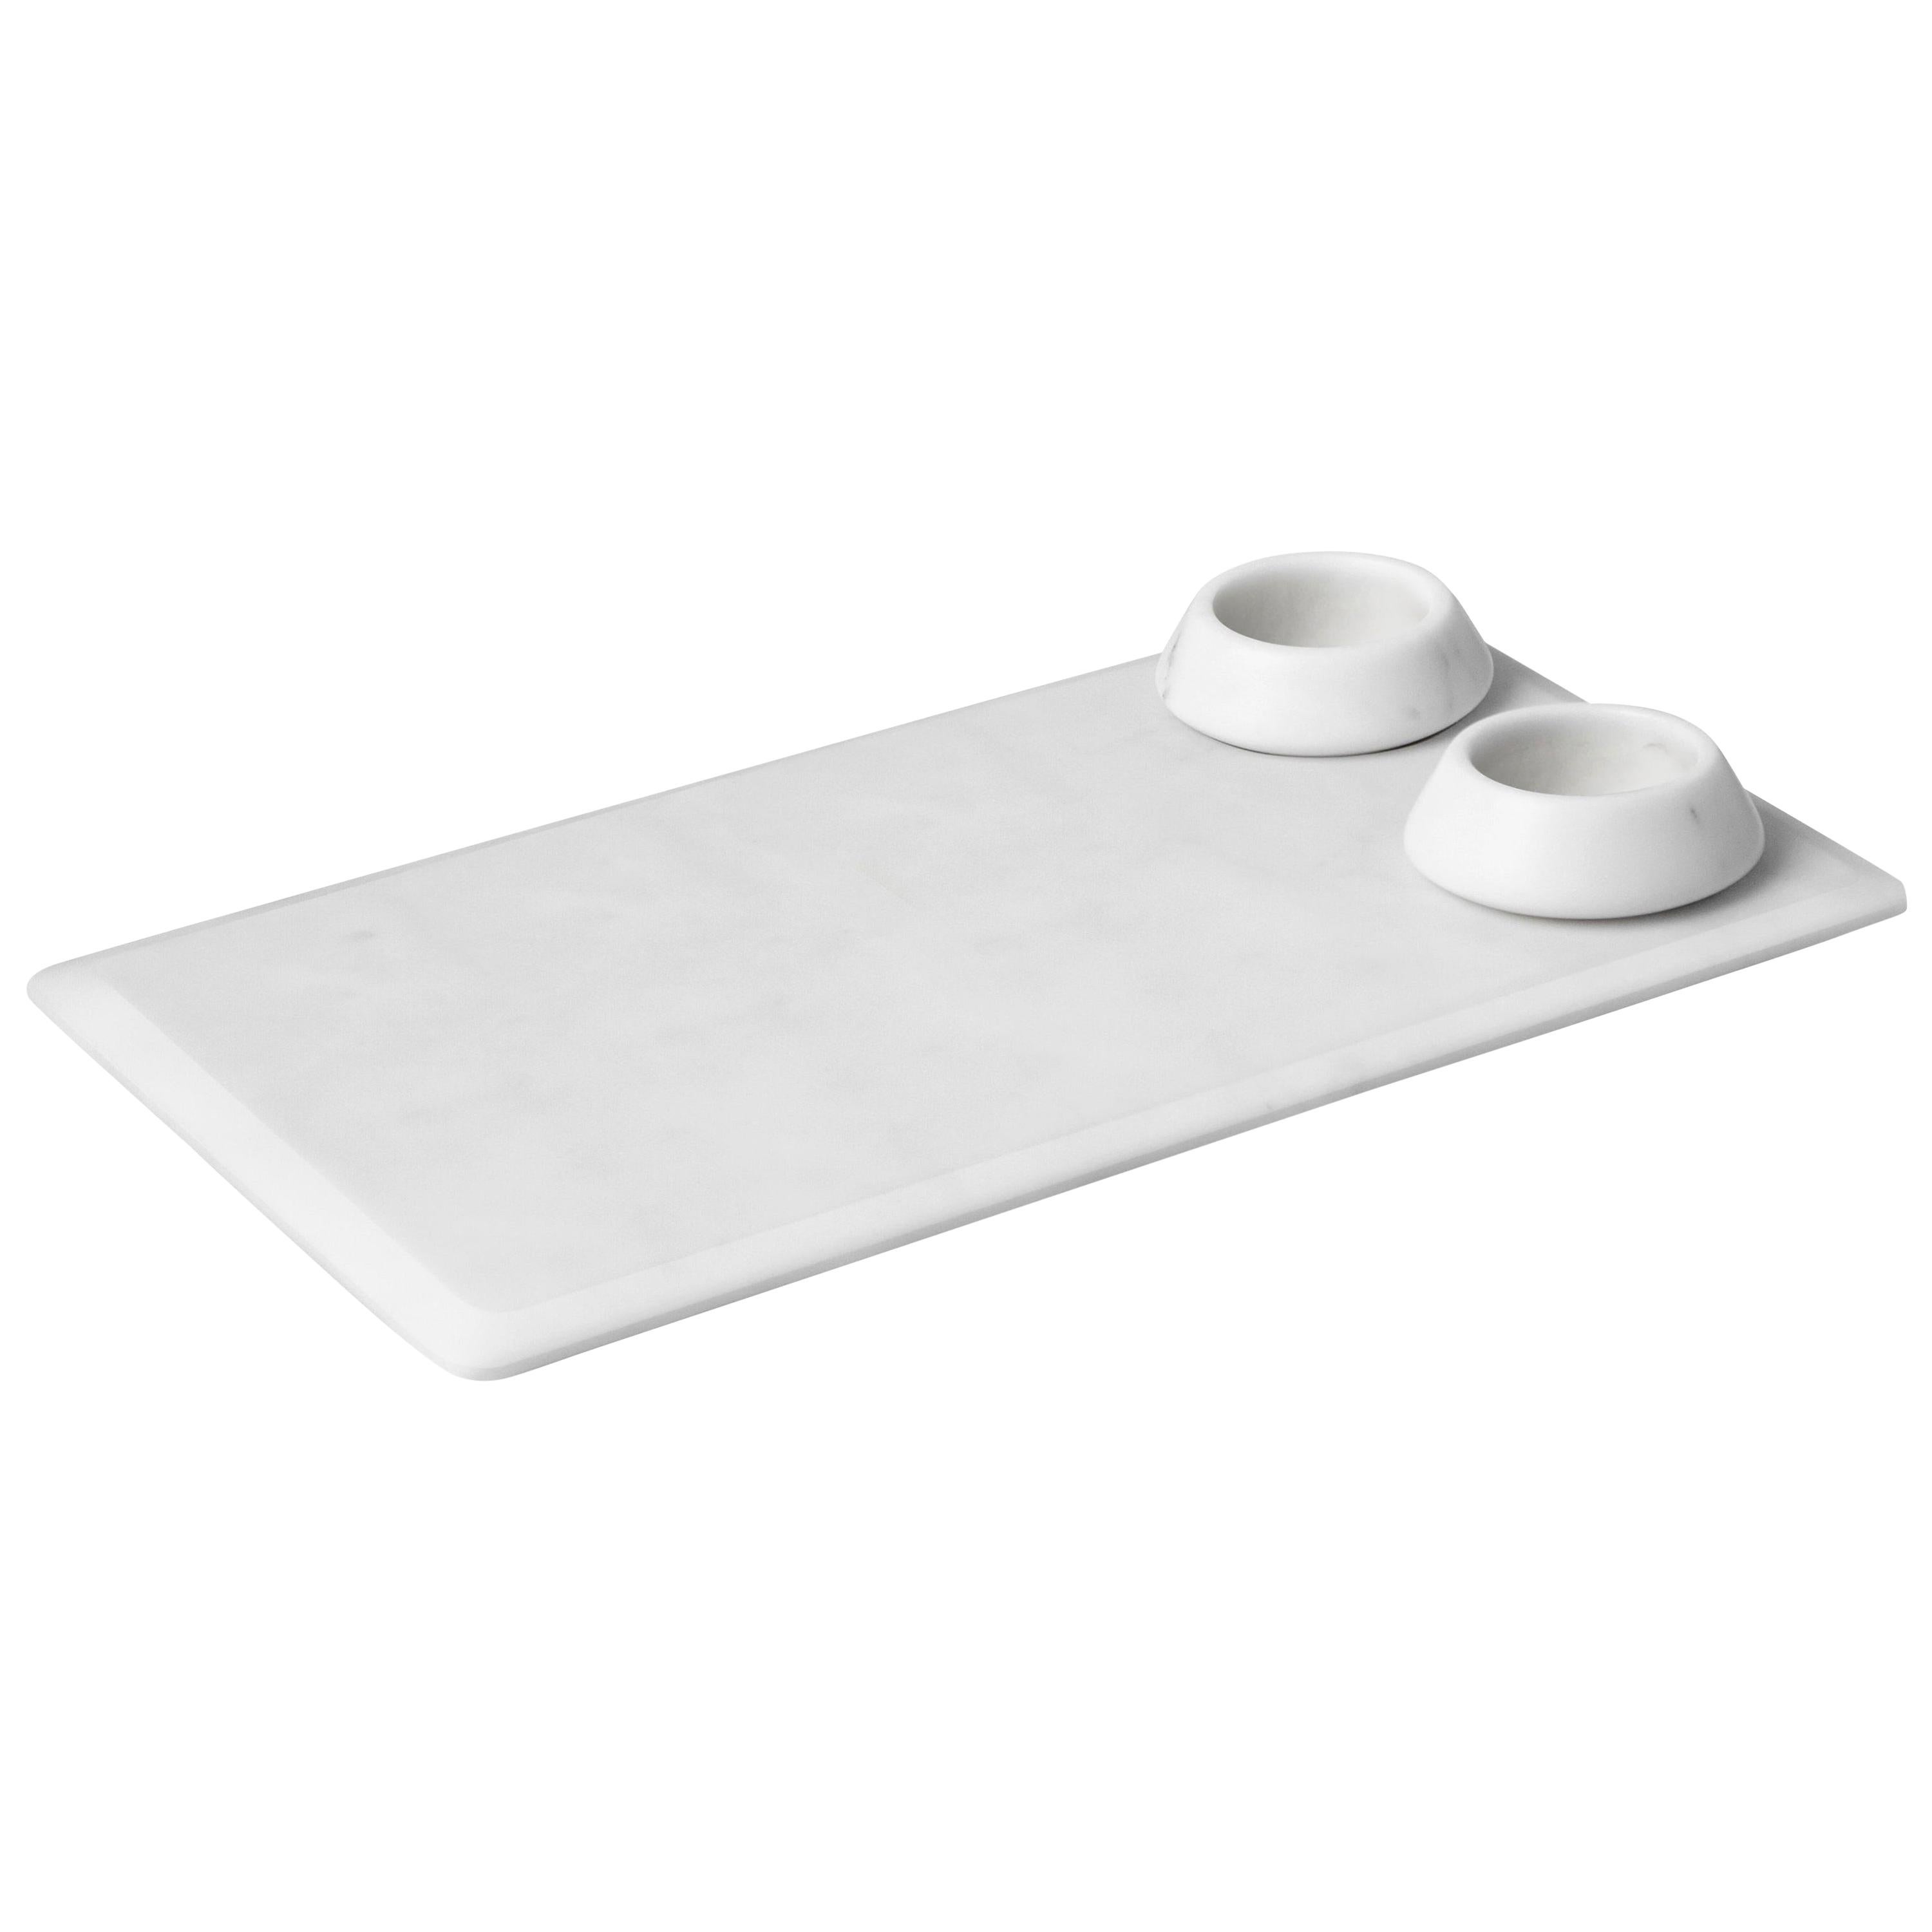 New modern Serving Platter with Bowls in white Marble Creator Colominas For Sale